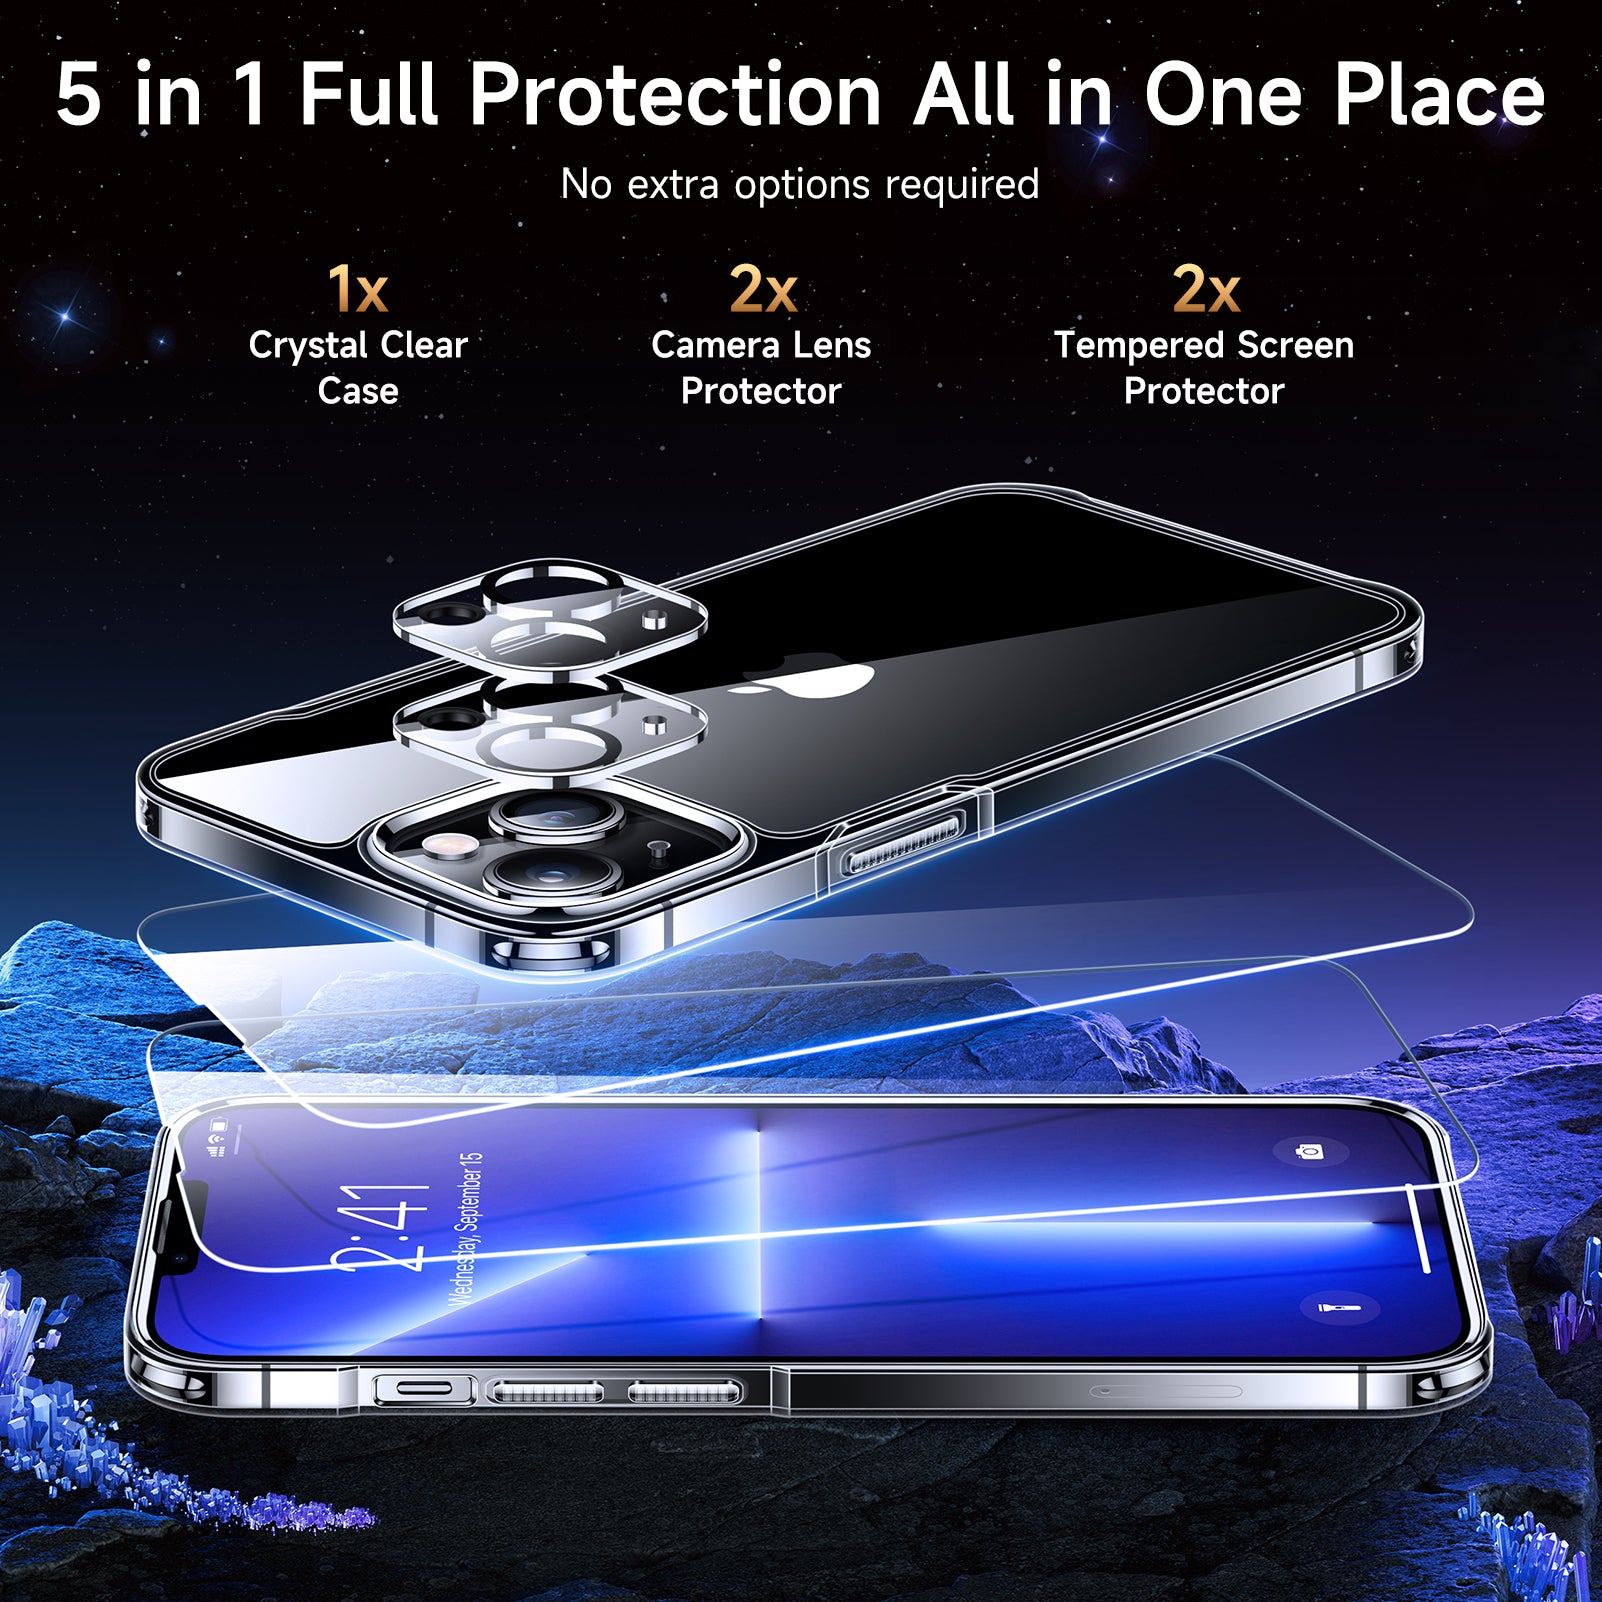 Black/Crystal Clear & 5 in 1 Full Body Protection